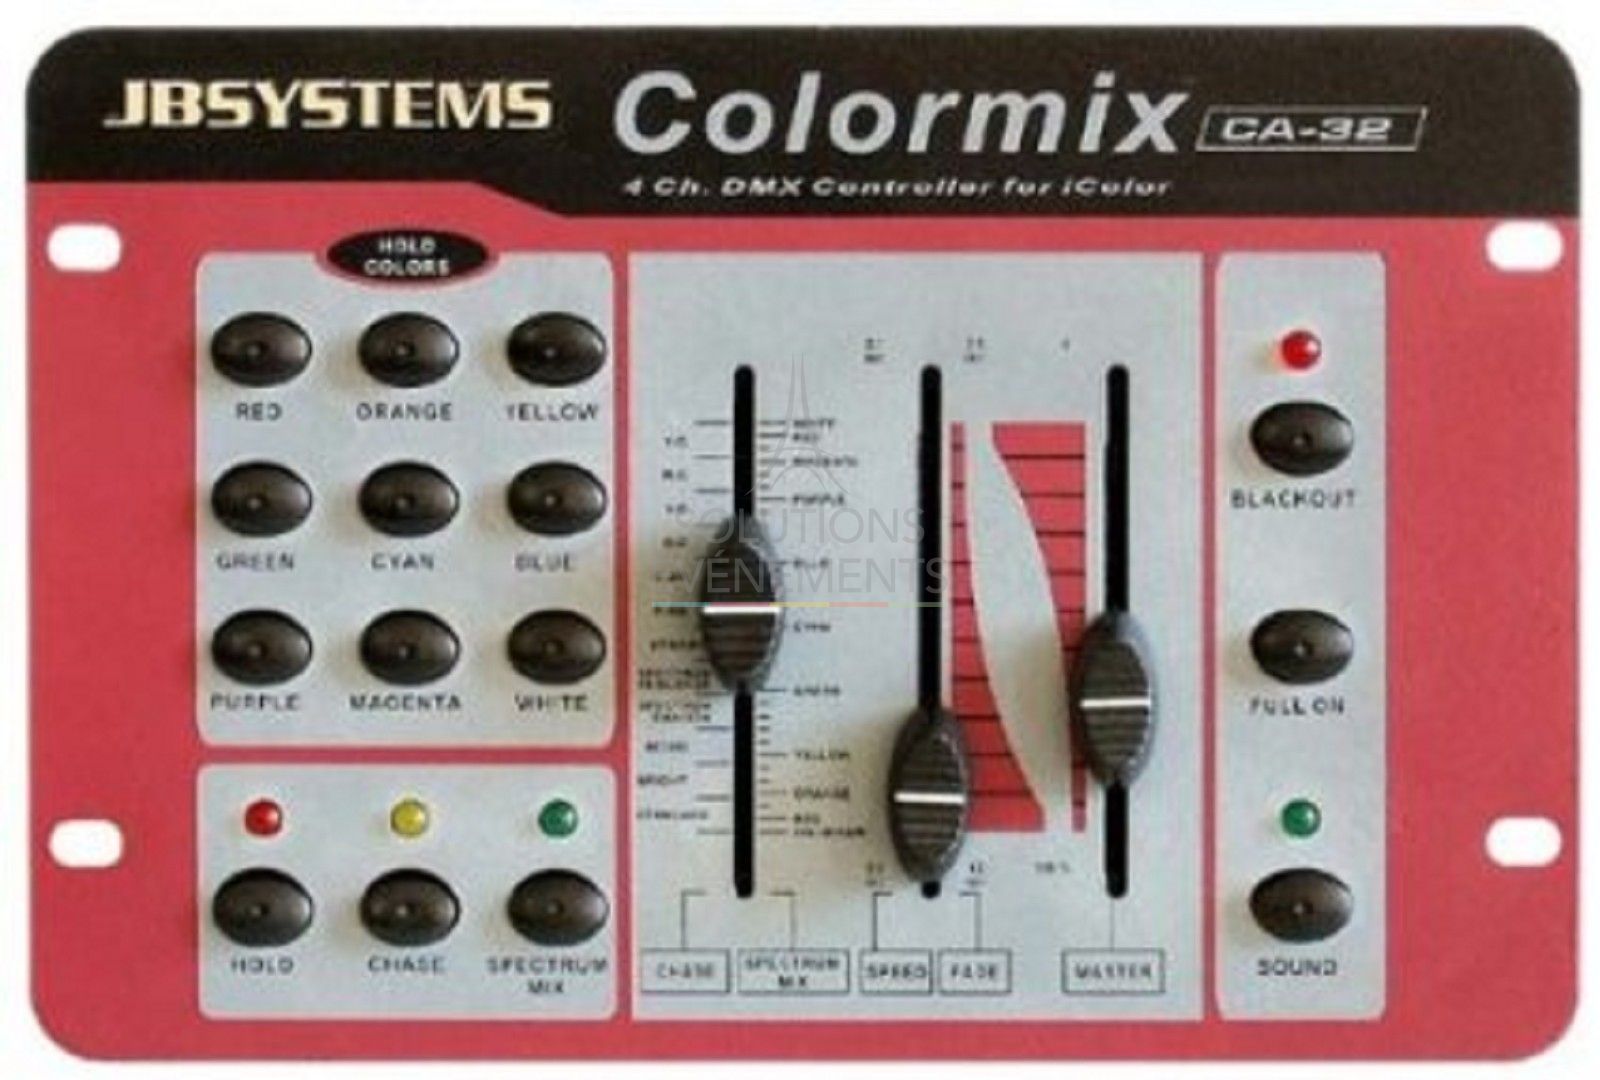 Location Jb systems - Colormix Ca32